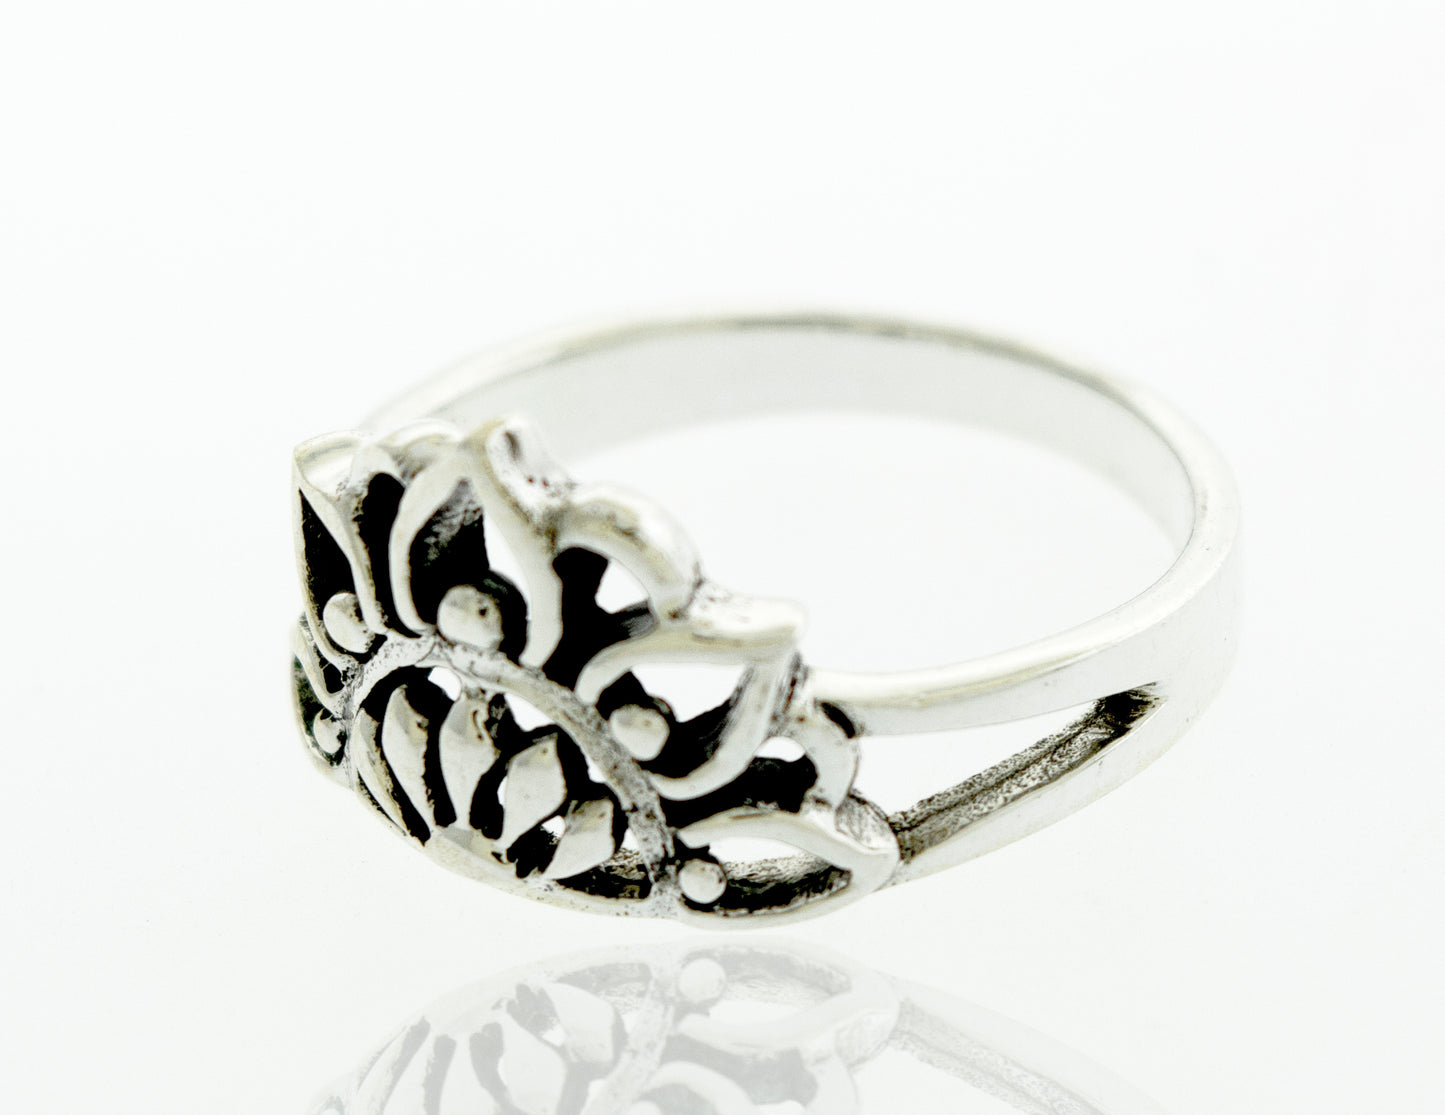 A cultural Half Mandala Ring with a floral lotus flower design.